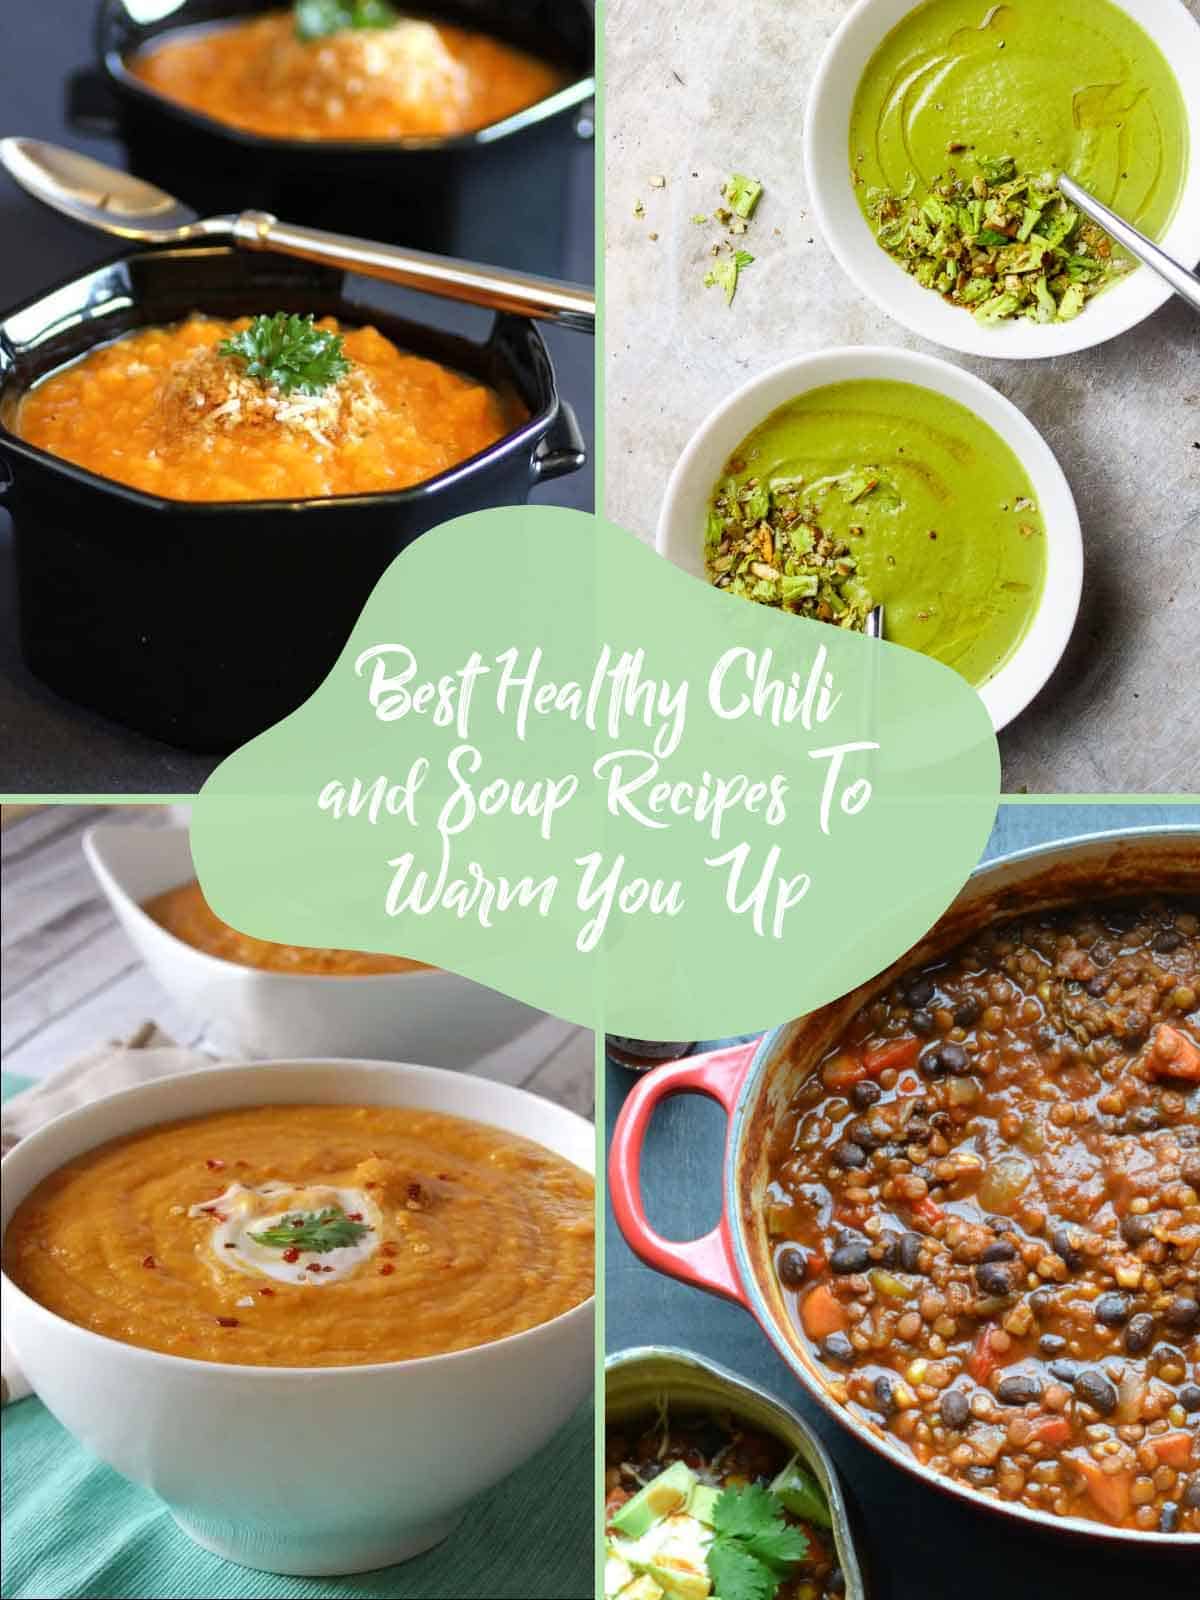 chili and soup recipes